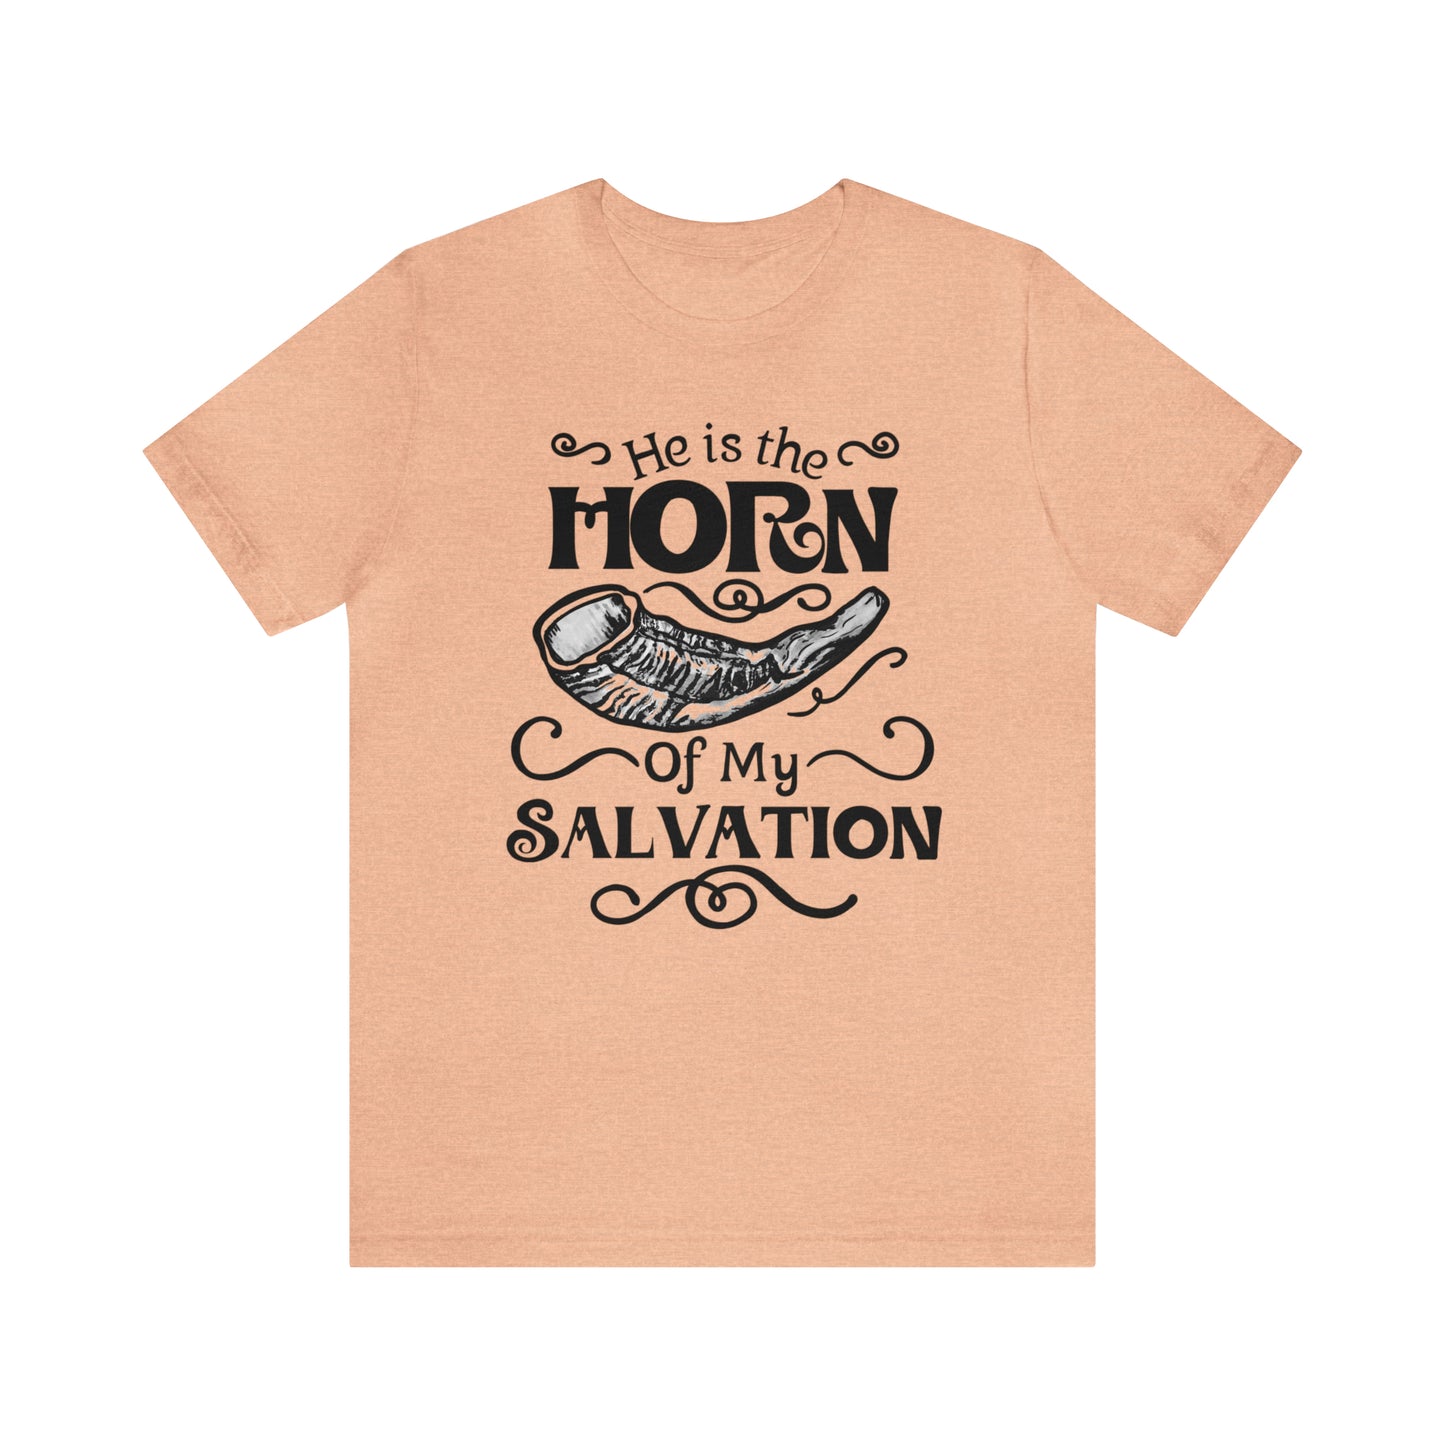 Shofar- He is the Horn of my Salvation (Green Pastures Apparel)